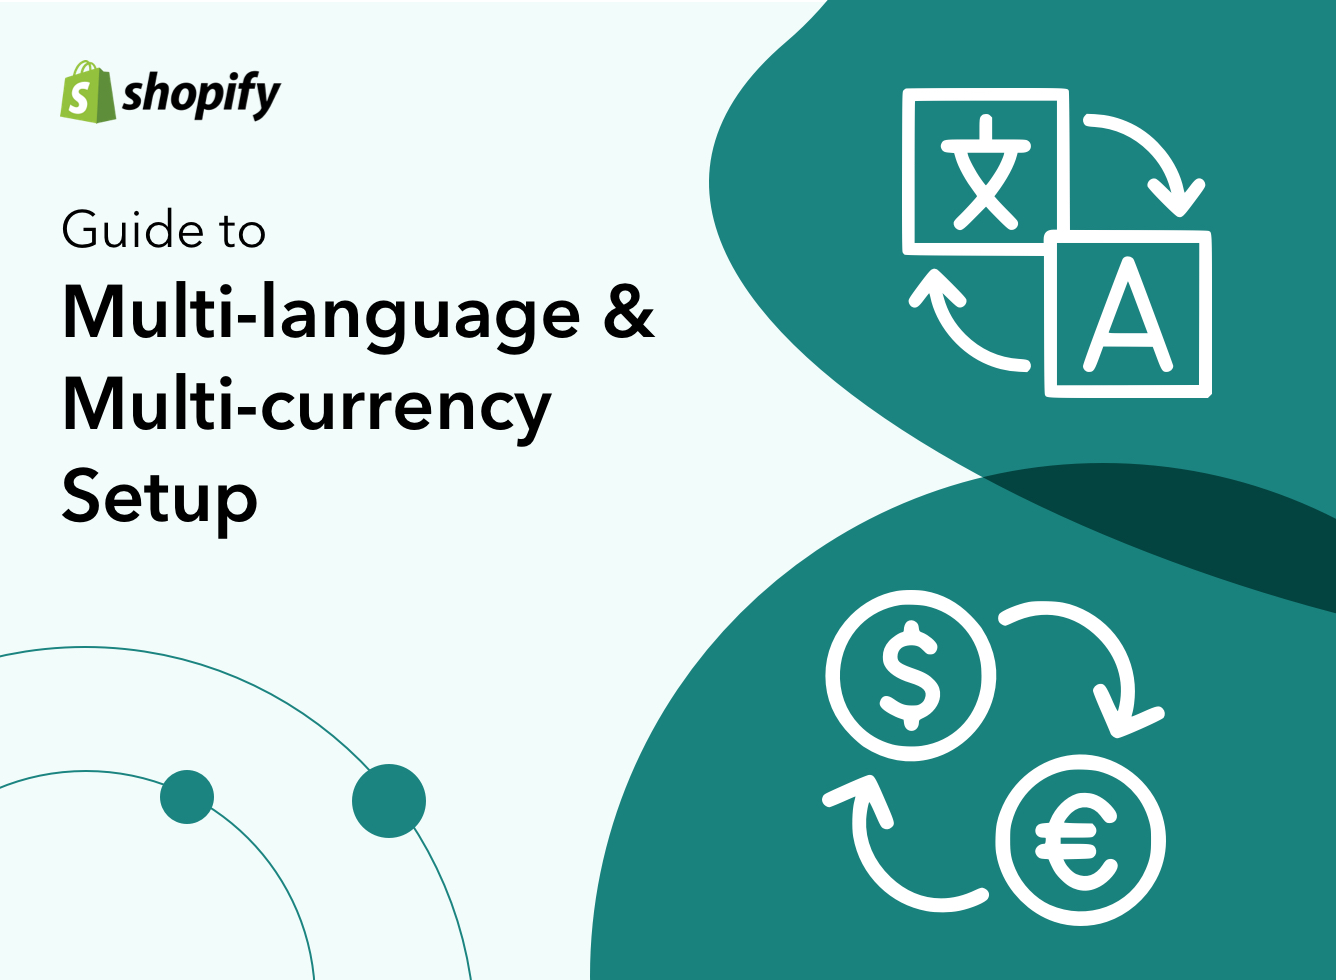 A Helpful Guide to Multi-language & Multi-currency Setup in Shopify